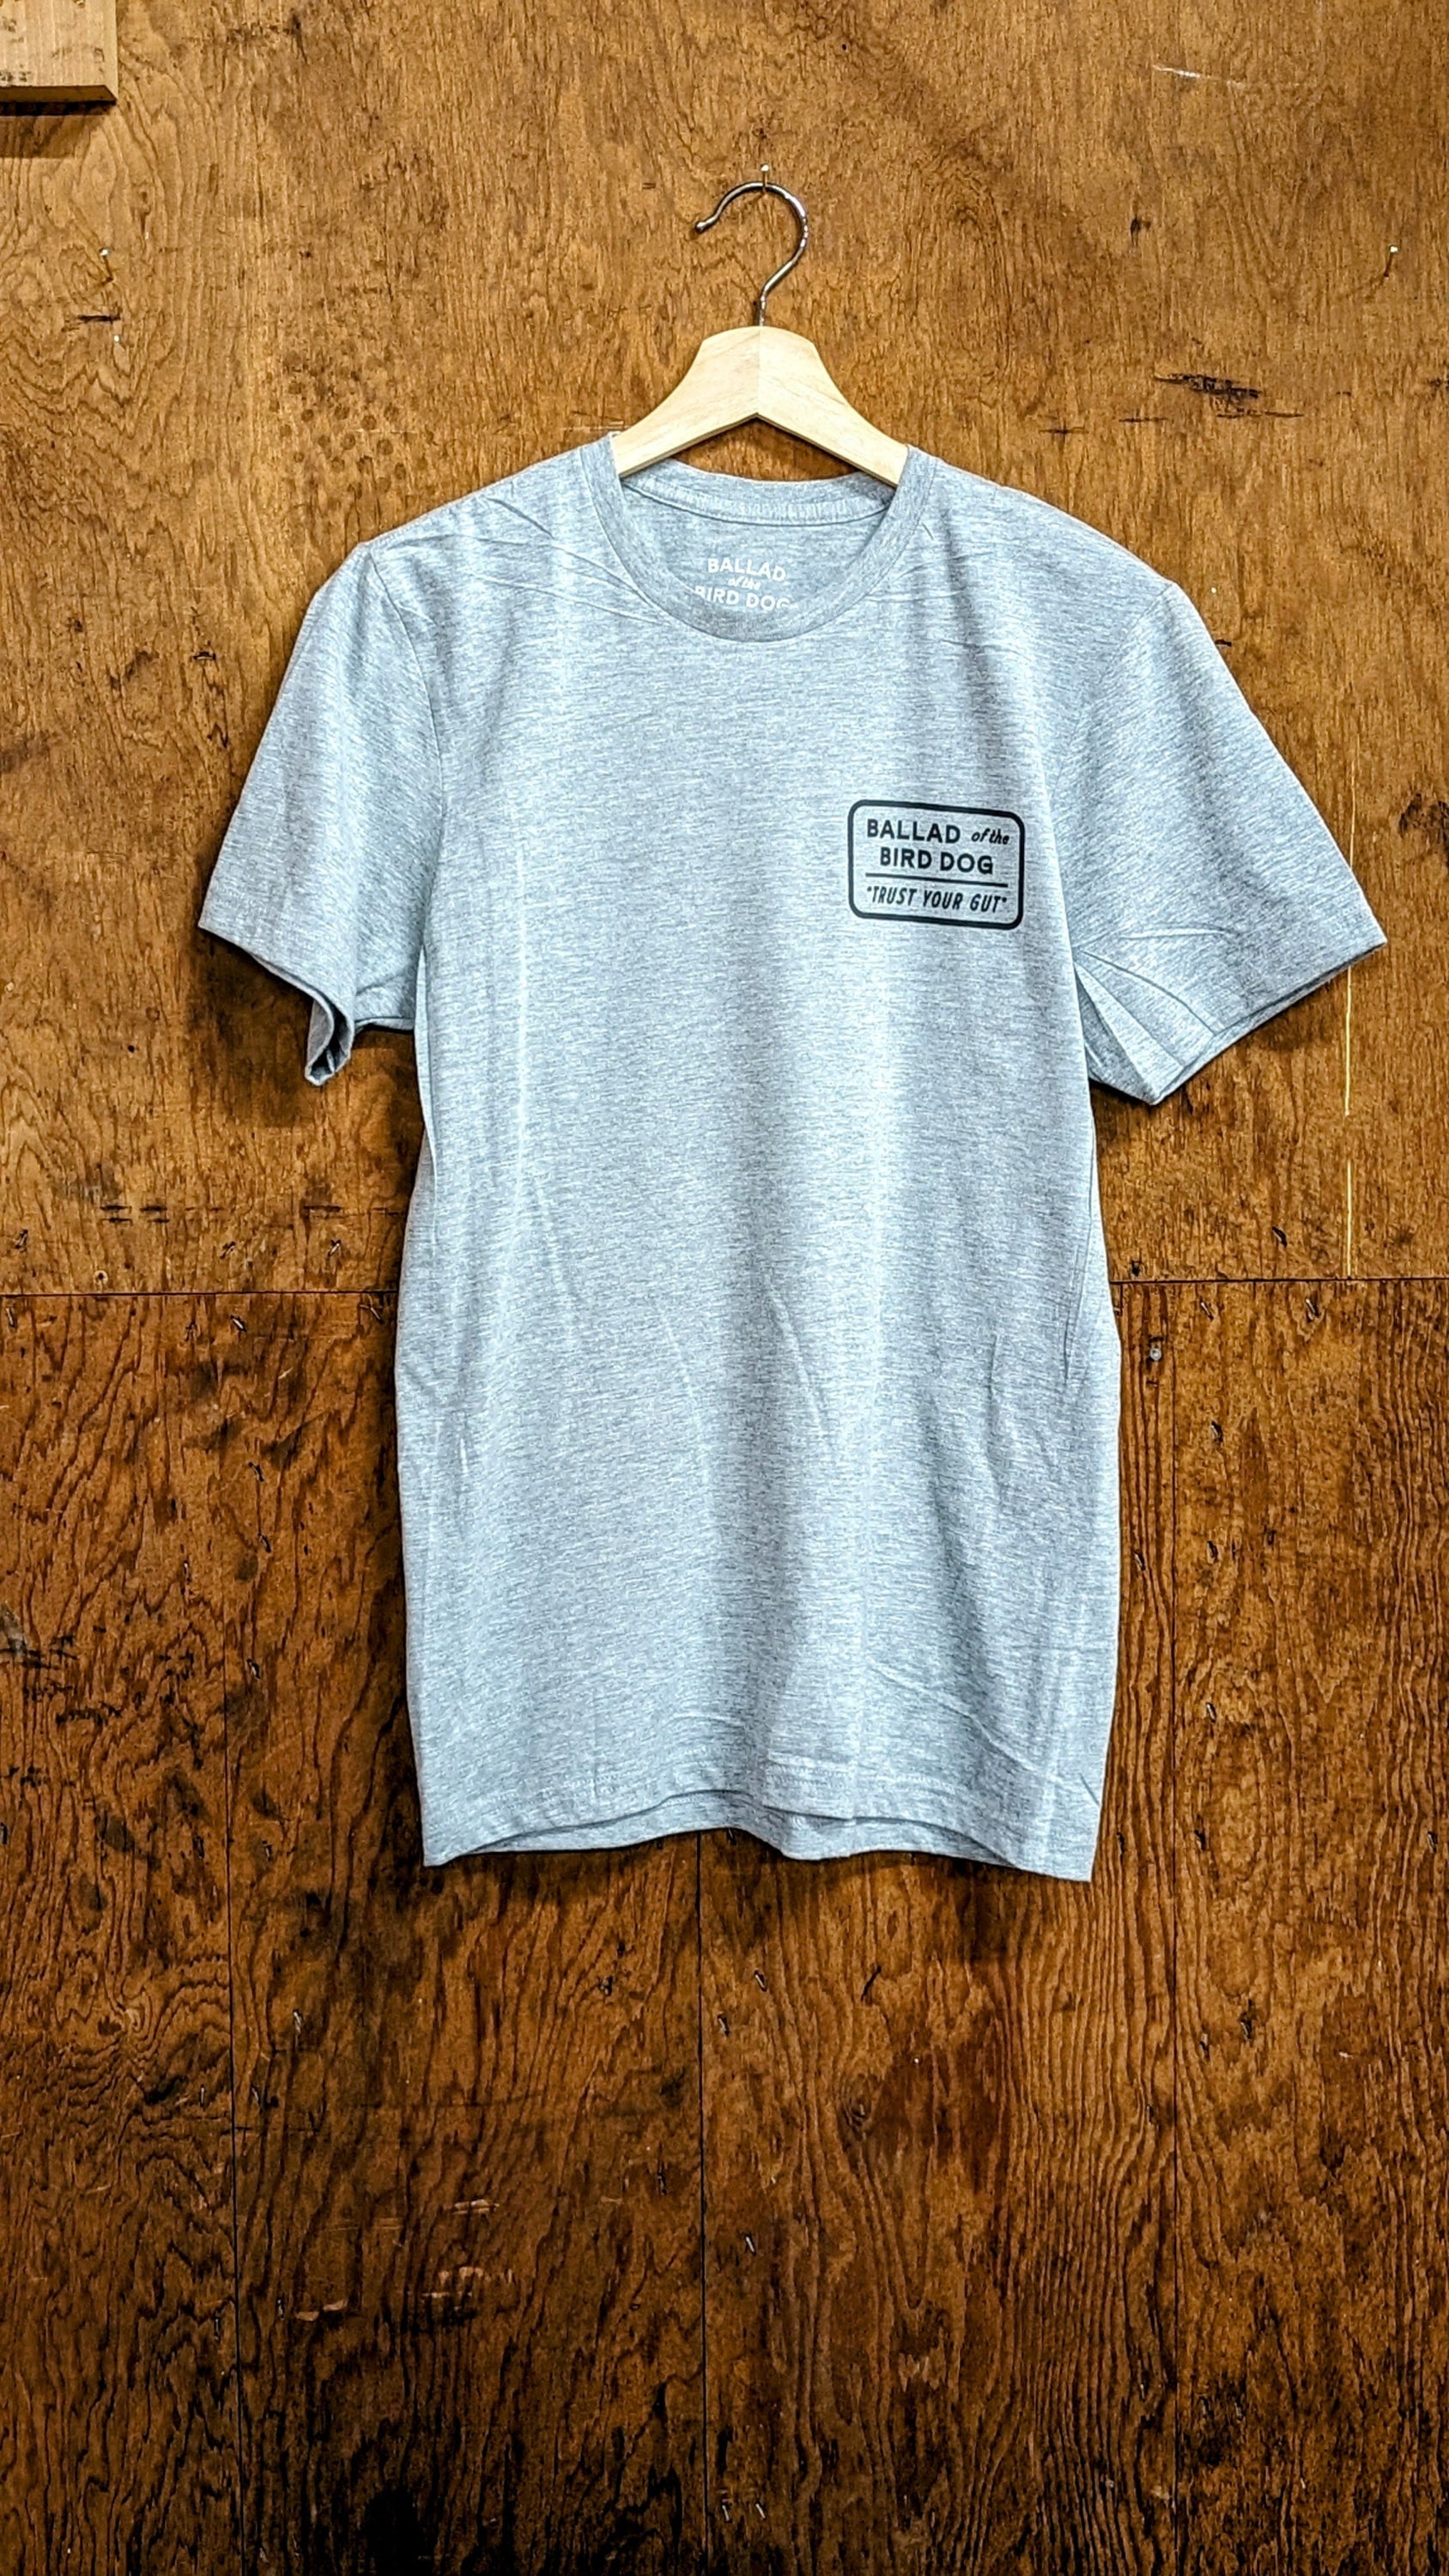 Vintage Slate T-shirt With Trust Your Gut Logo From Ballad Of The Bird Dog